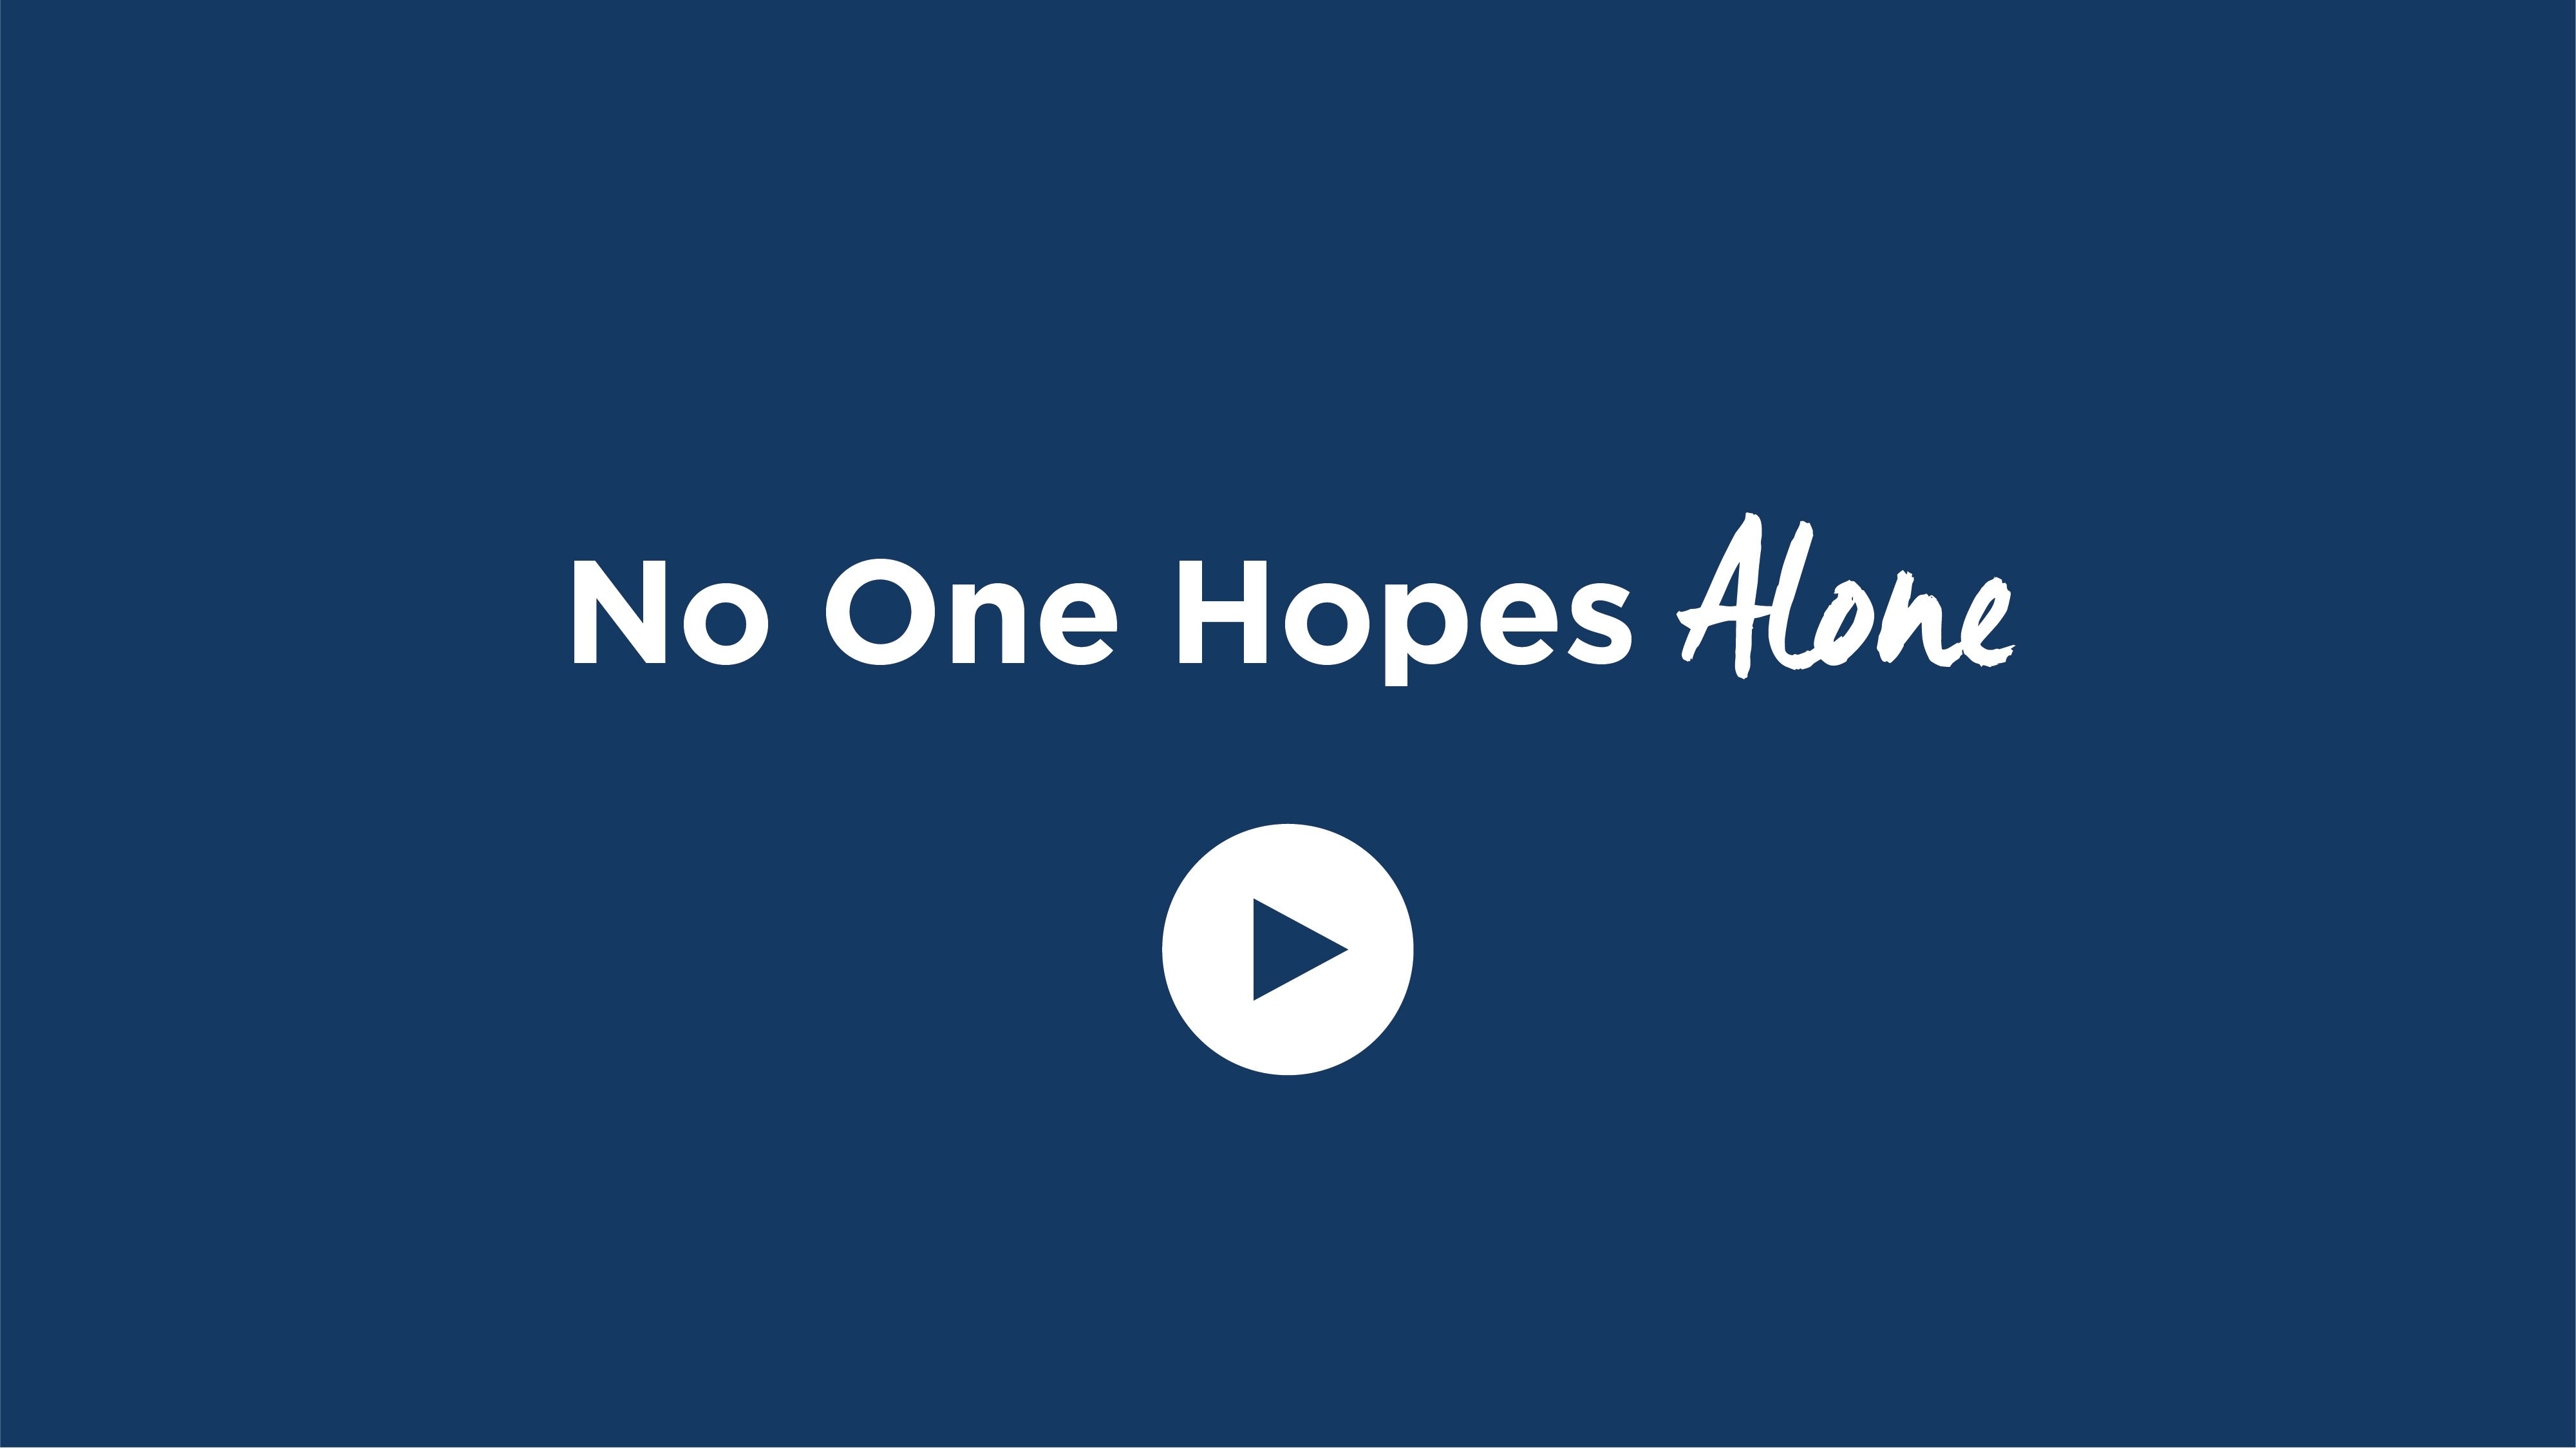 No One Hopes Alone - Click to Watch Video